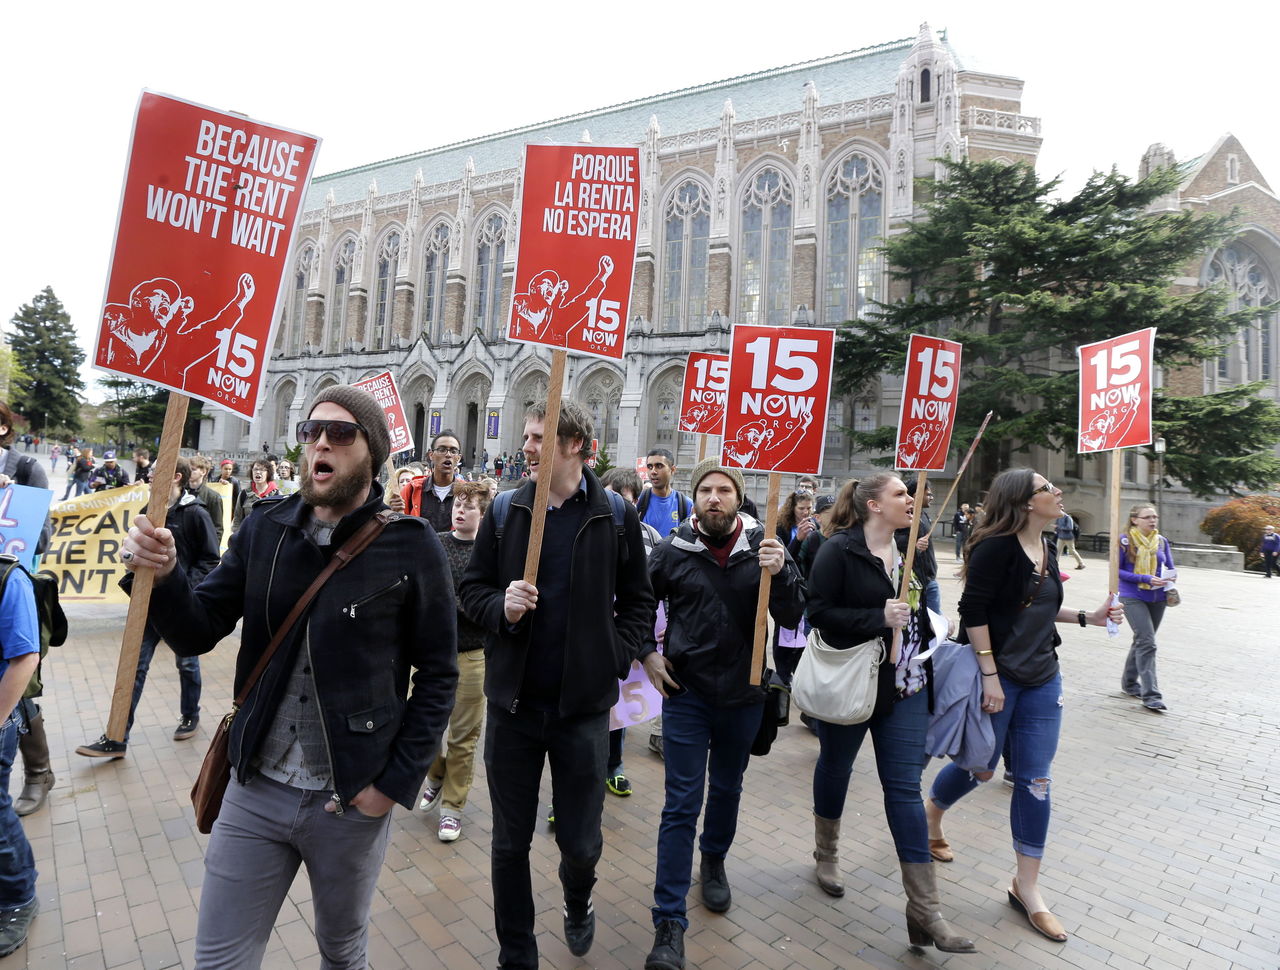 In this April, 1, 2015, photo, students and other supporters protest on the University of Washington campus in Seattle in support of raising the minimum wage for campus workers to $15 an hour.